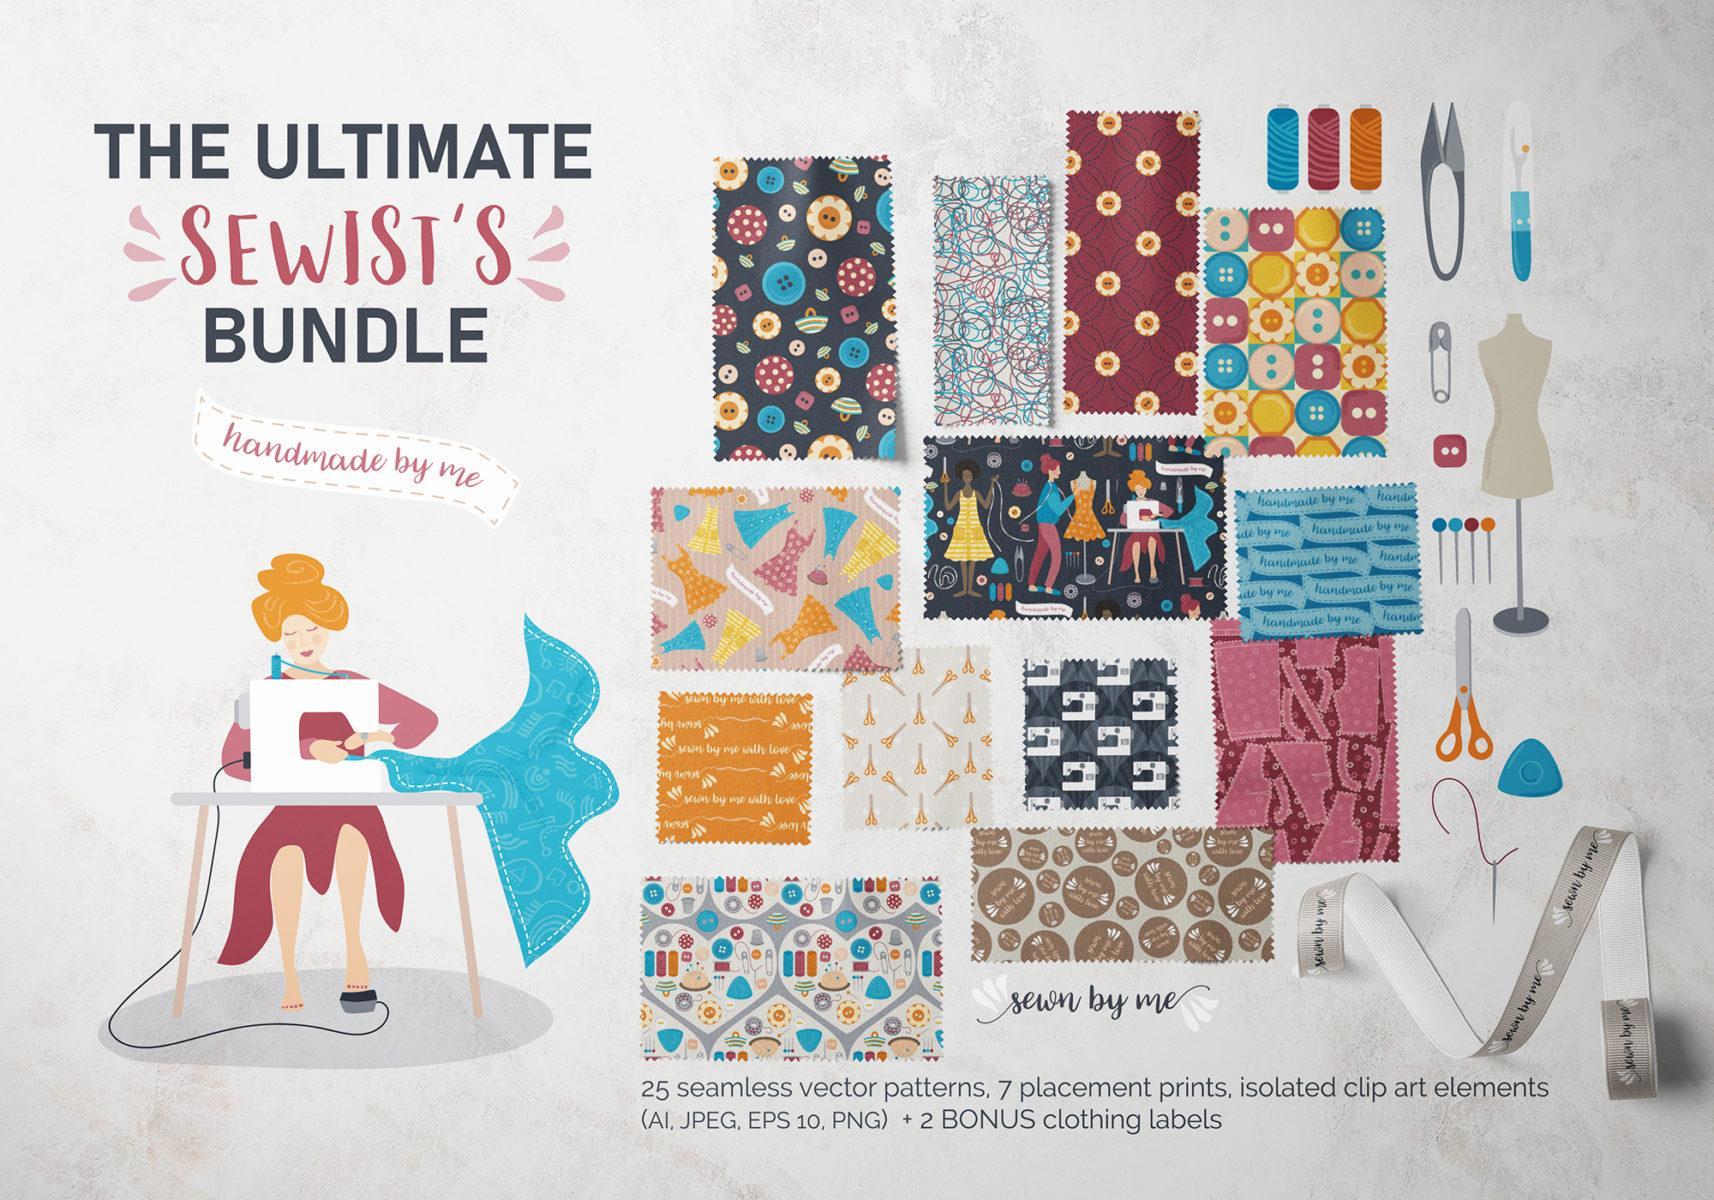 The ultimate sewist's bundle pattern collection